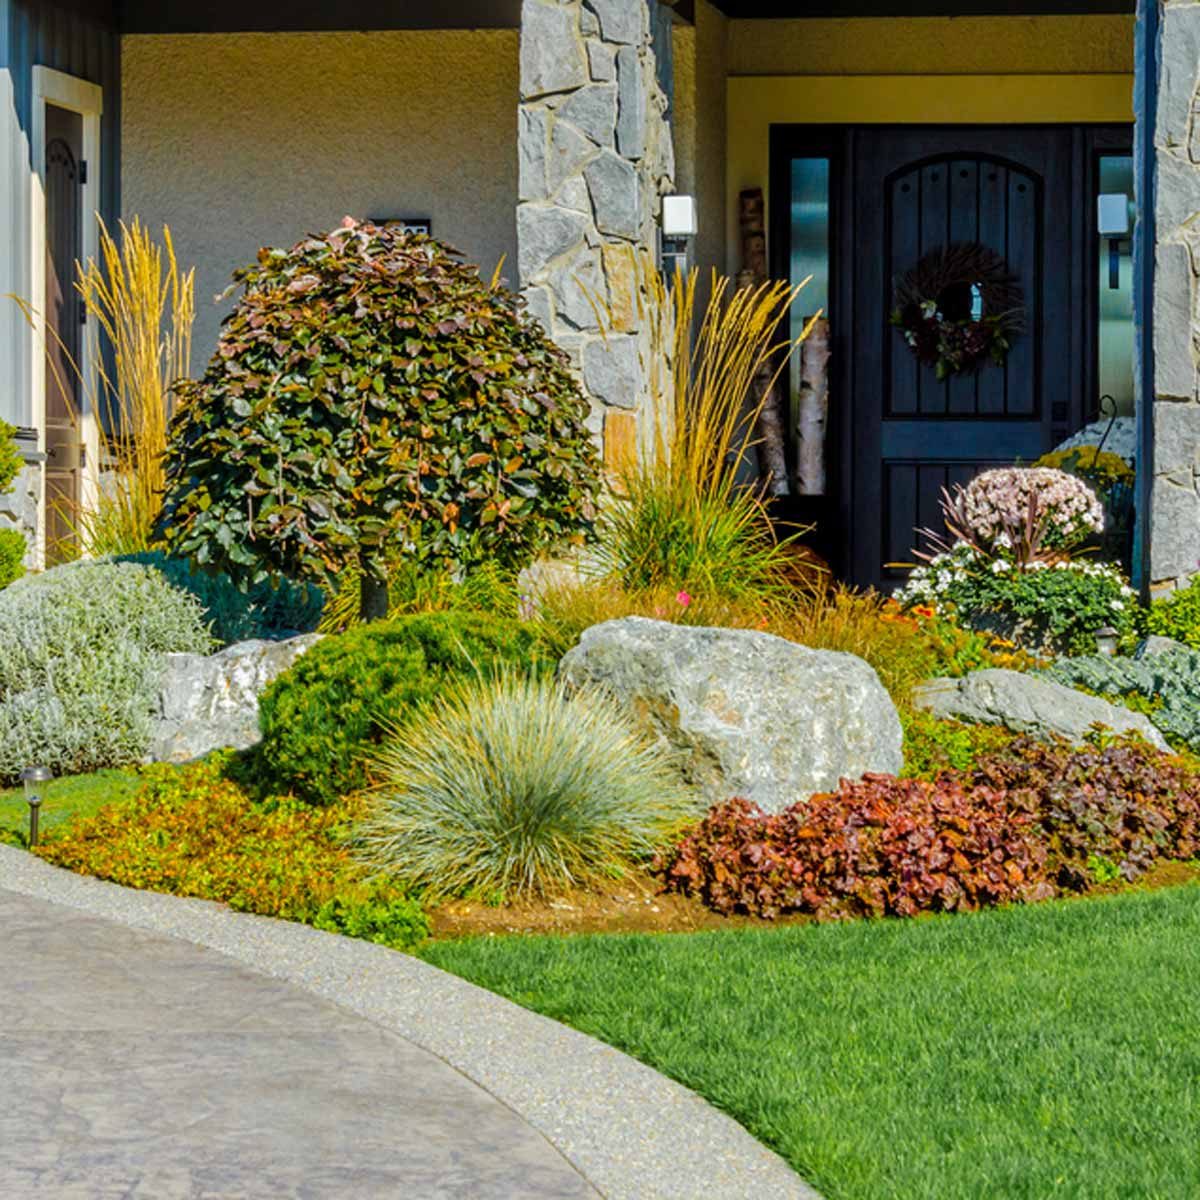 12 Simple Ways to Enhance Curb Appeal | The Family Handyman